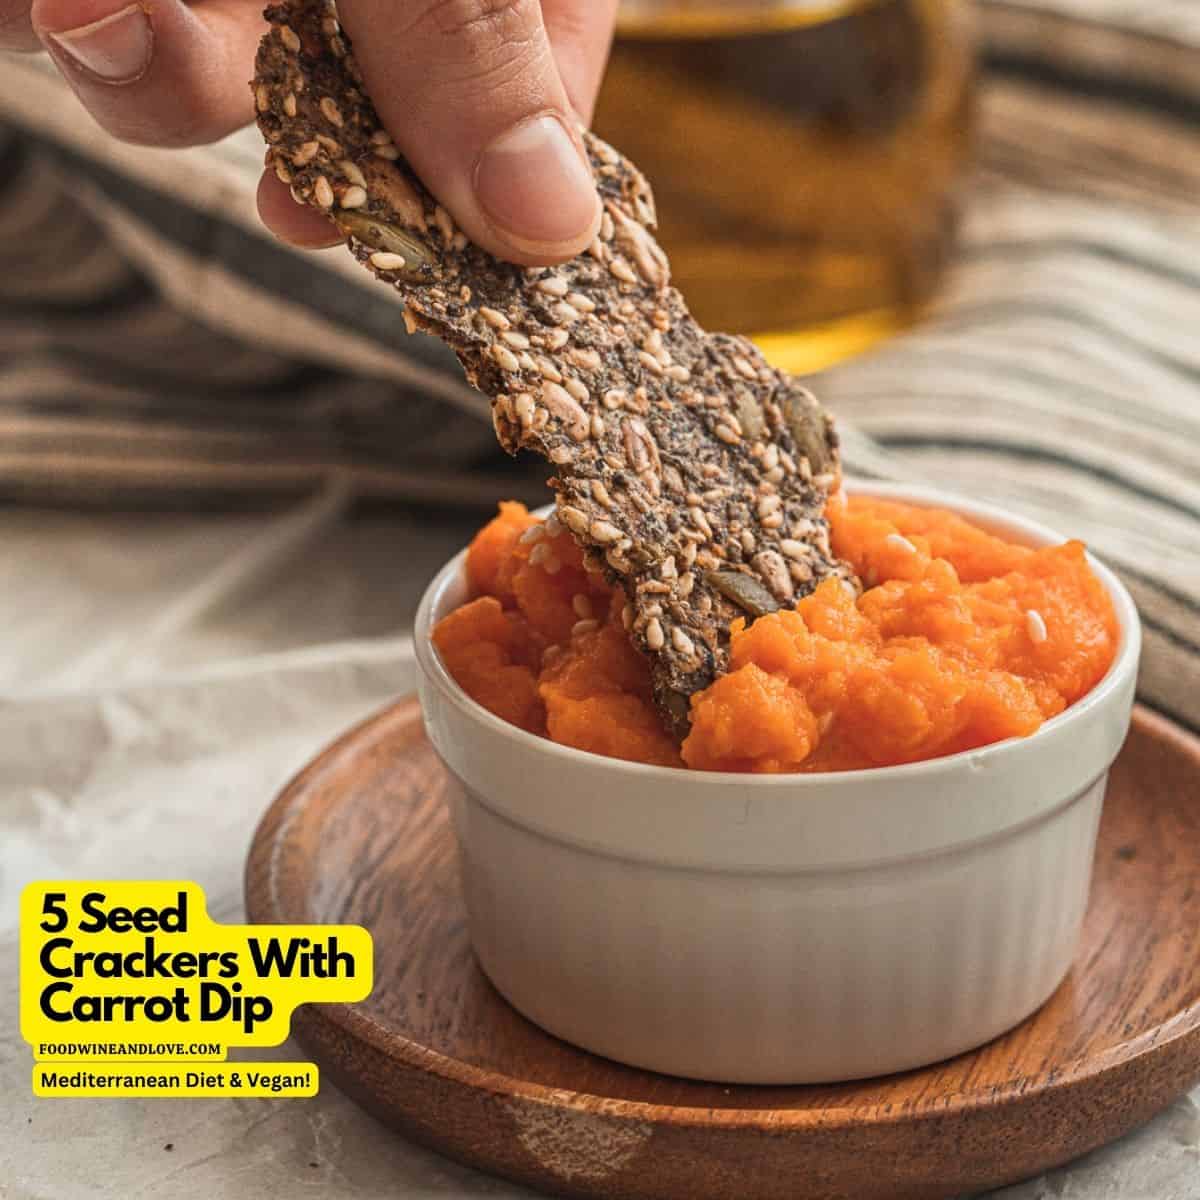 5 Seed Crackers With Carrot Dip, a simple vegan recipe for healthy grain free crackers with a five ingredient healthy dip. Vegetarian.MedDiet